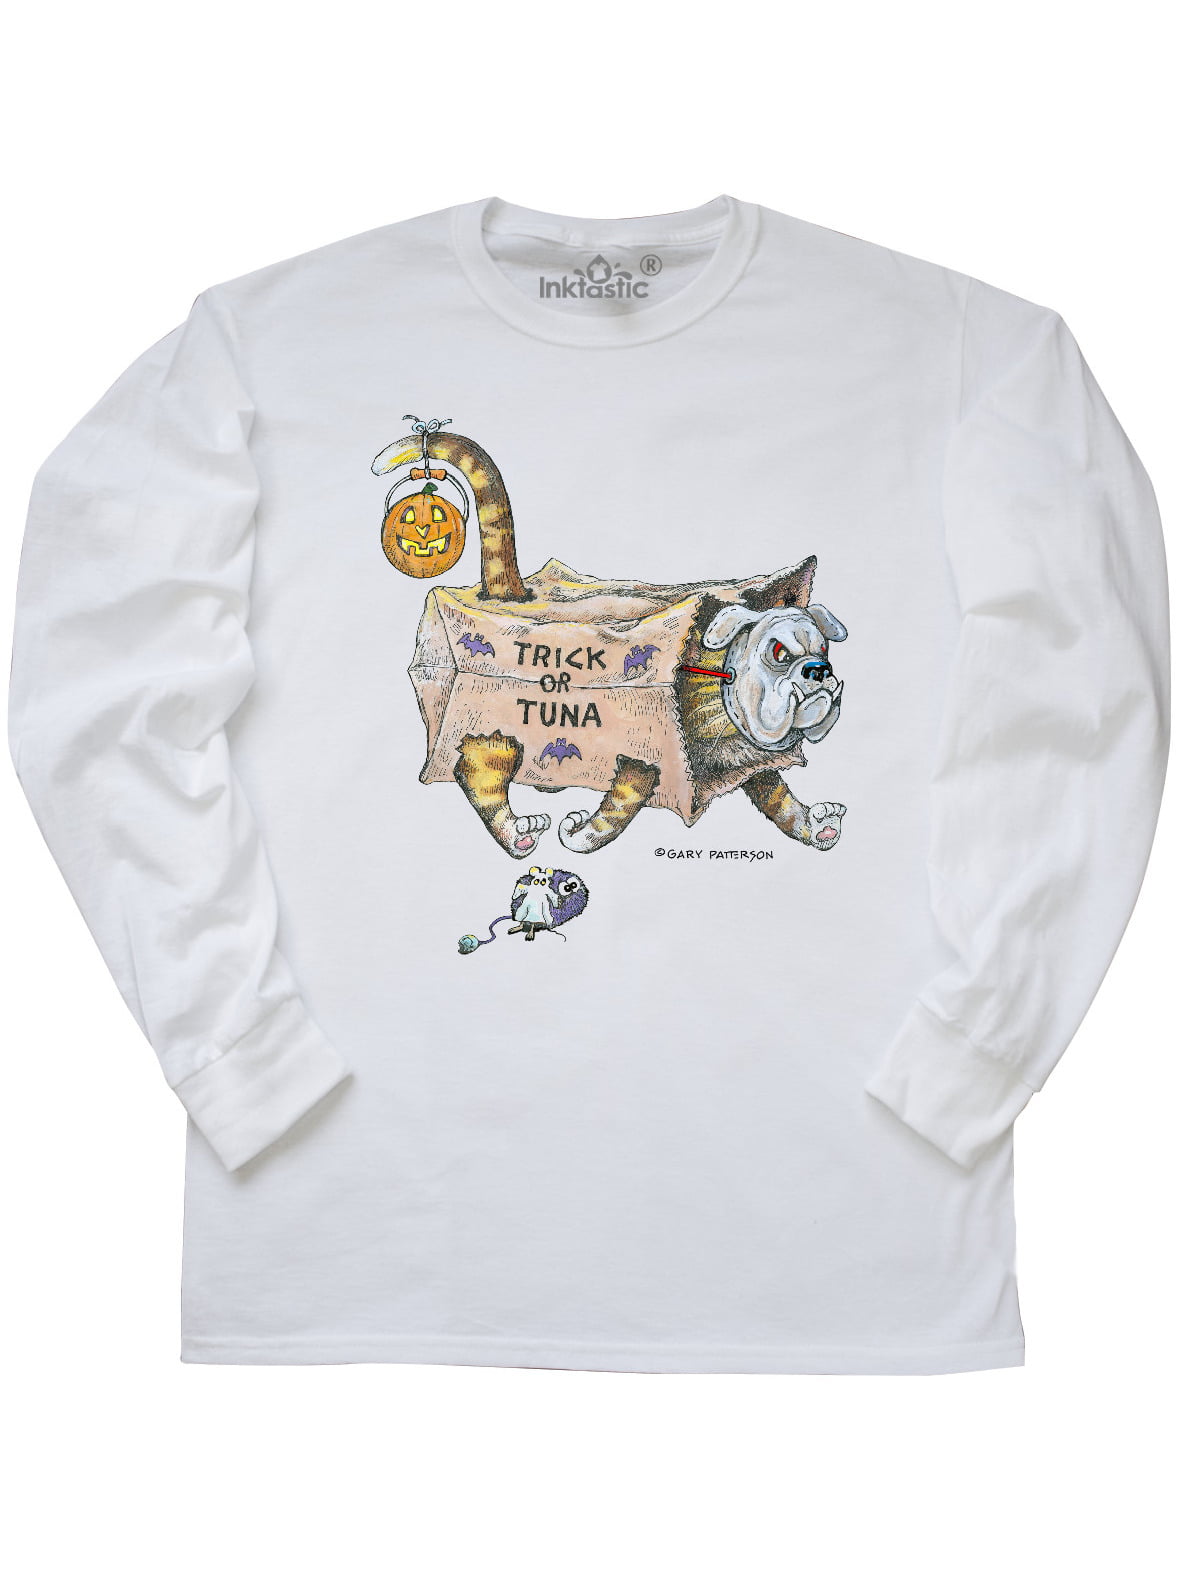 Inktastic Trick or Tuna Cat in Dog Costume Long Sleeve T-Shirt 